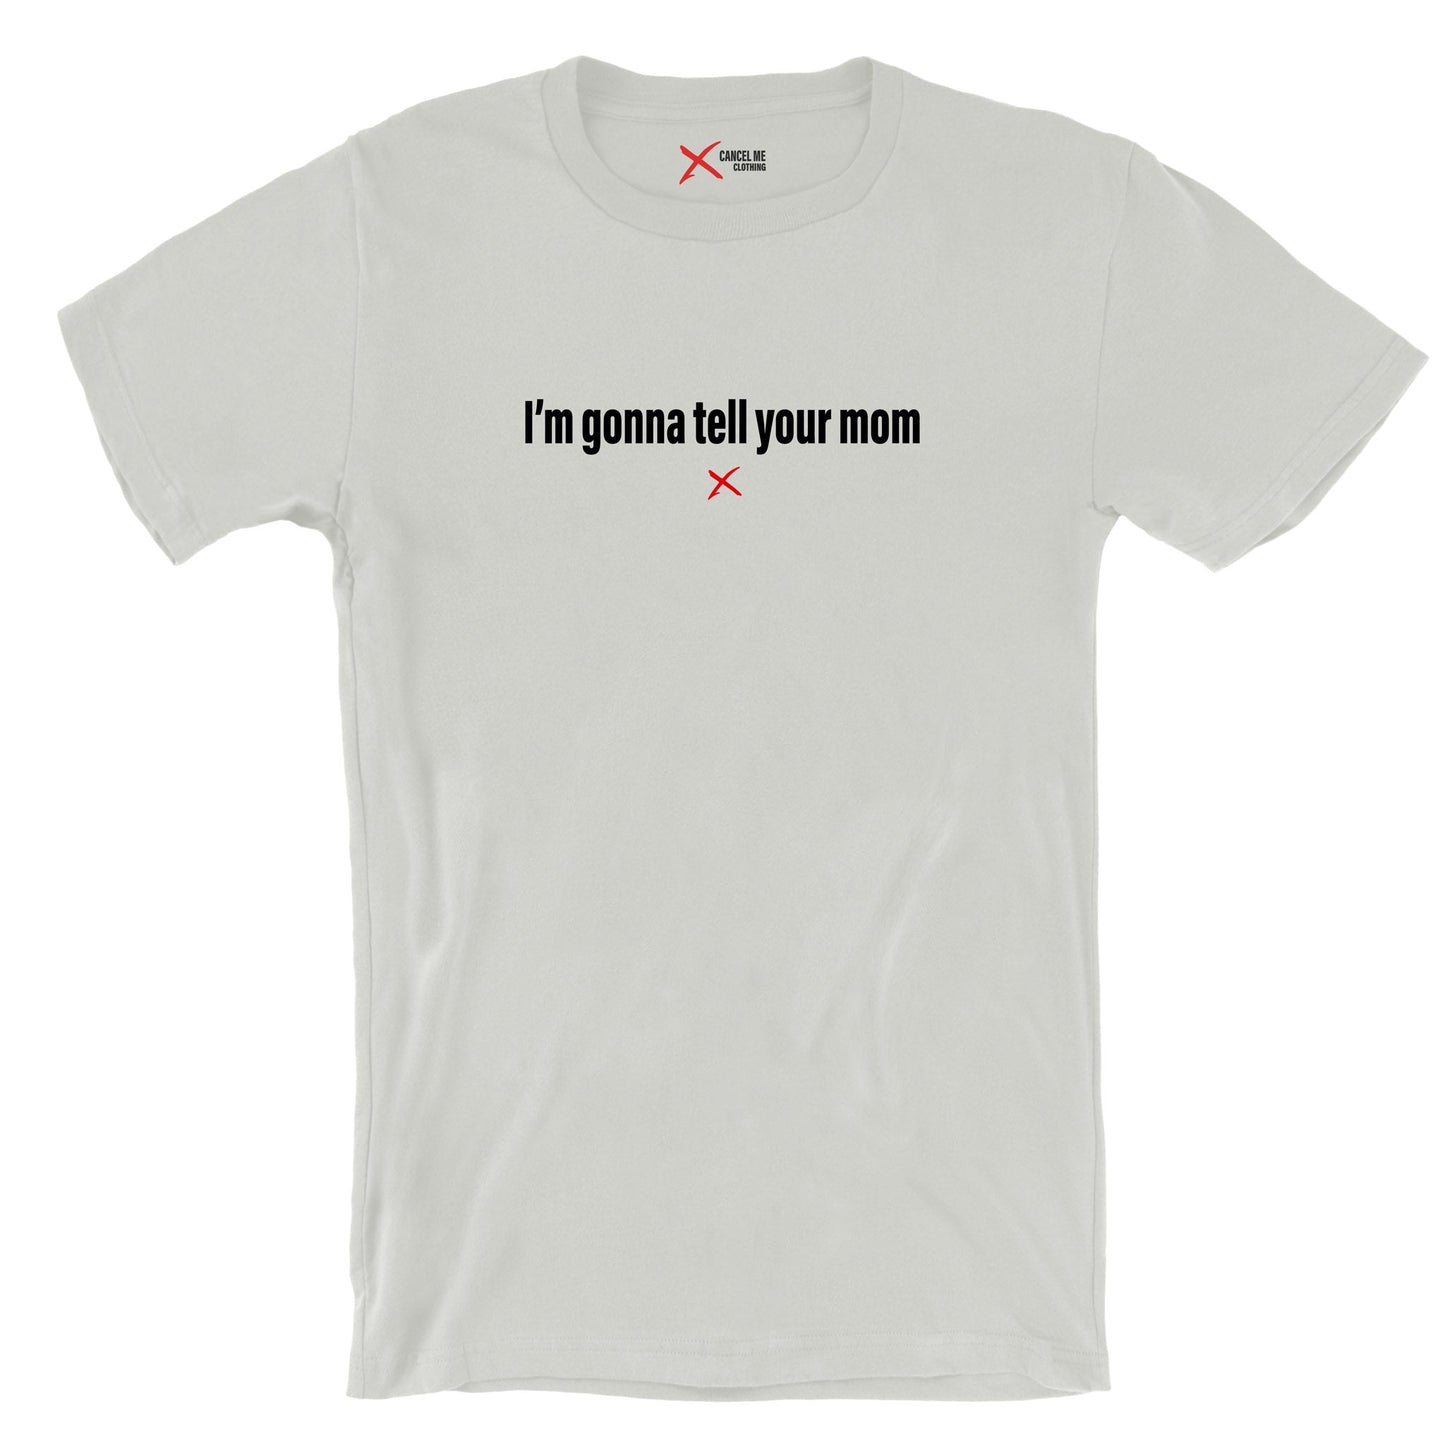 I'm gonna tell your mom - Shirt